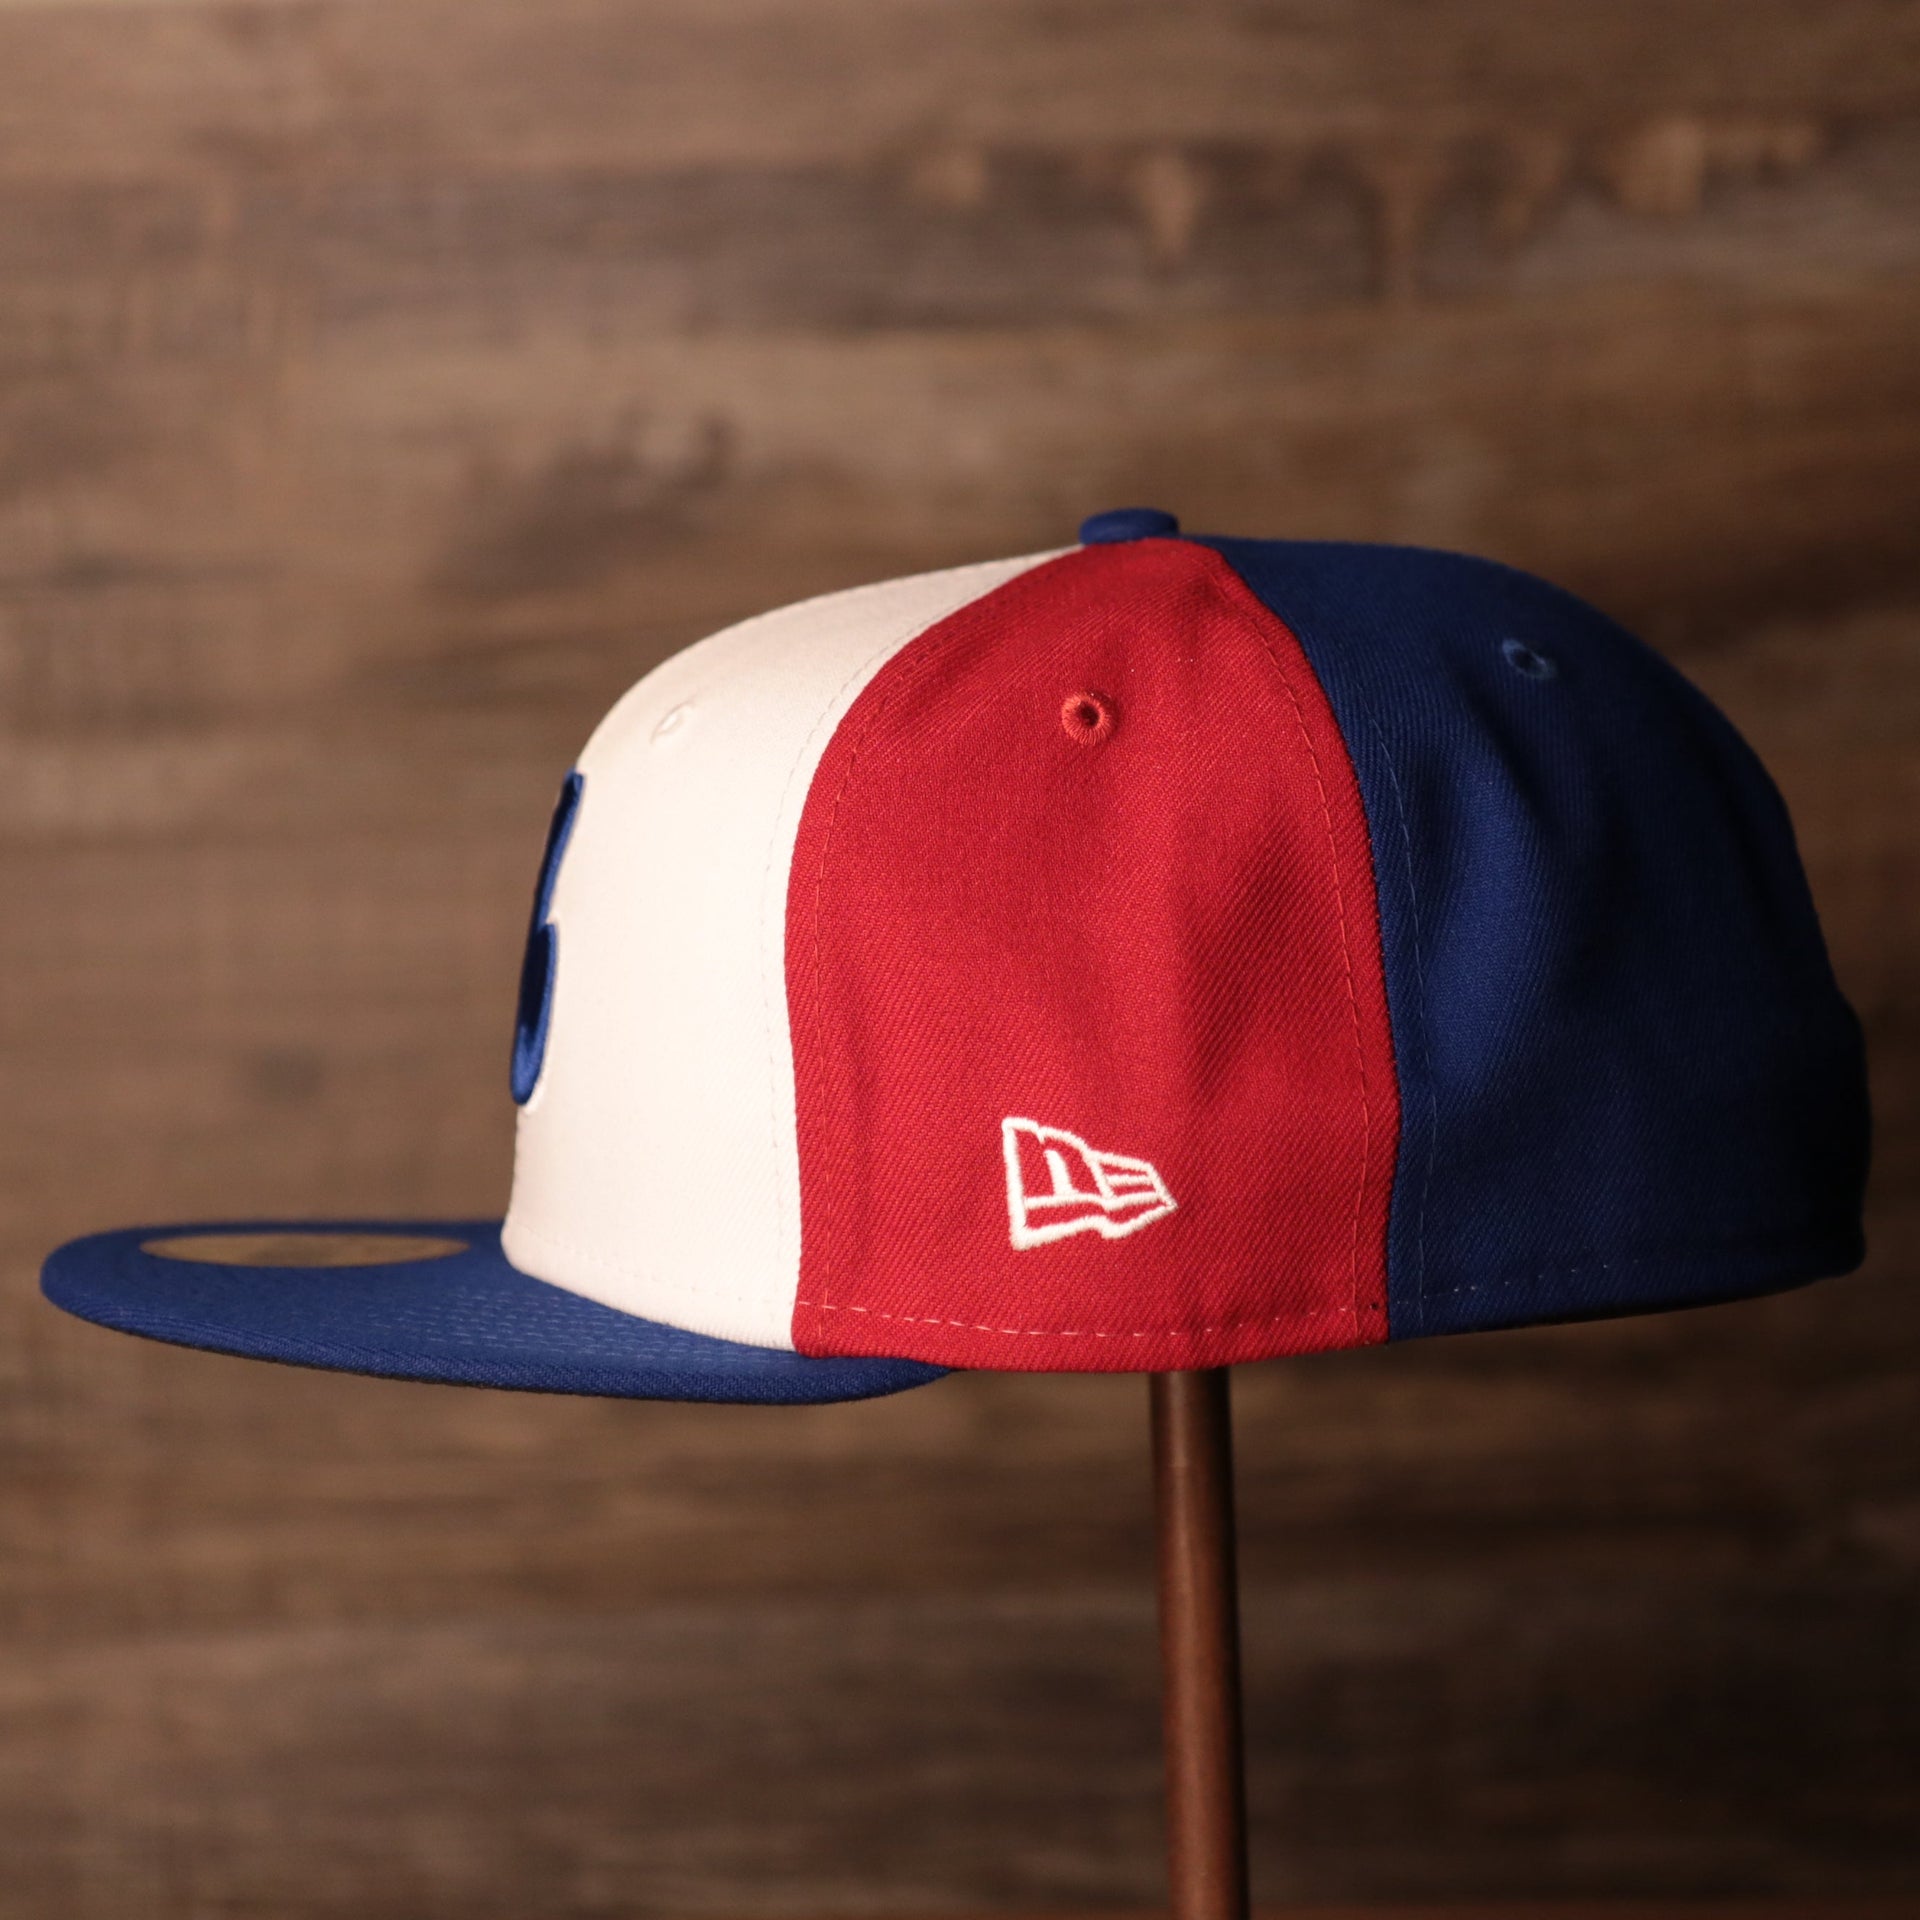 We can see the three colors of this 1969 pinwheel retro fitted cap with the logo of New Era in white.